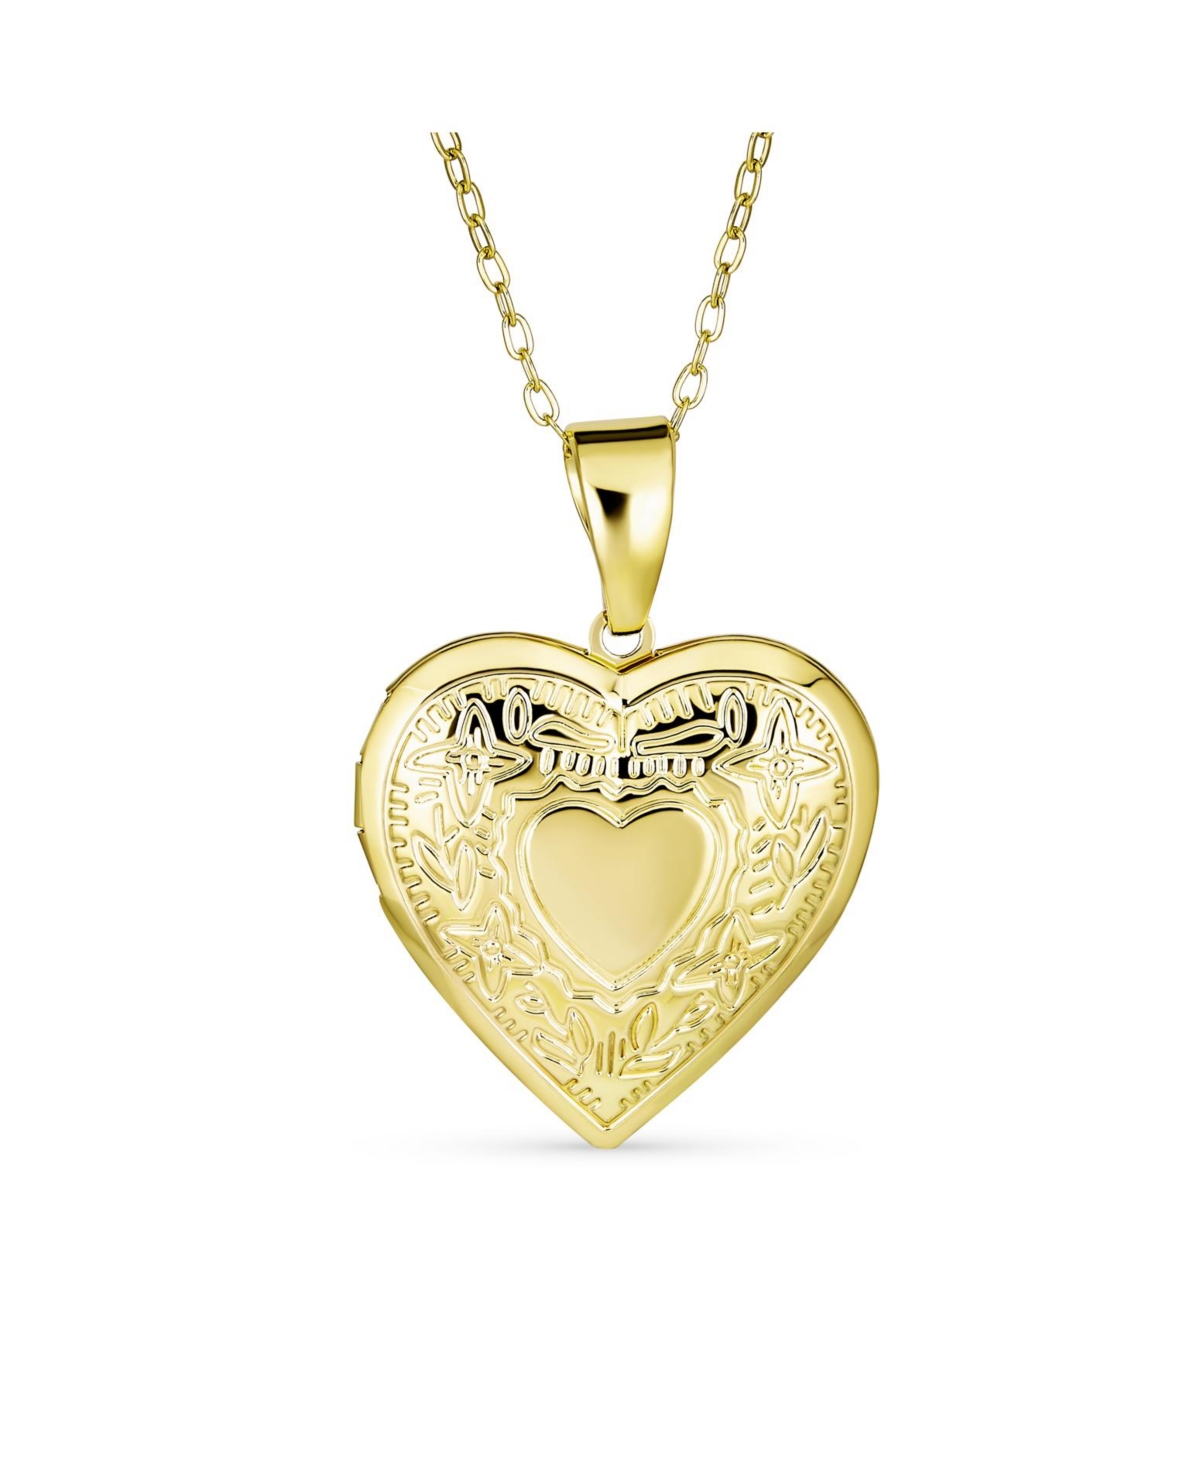 Engrave Initials Traditional Keepsake Puff carved Leaf Heart Shaped Photo Locket For Women Holds Photos Pictures 18K Gold Plated Necklac